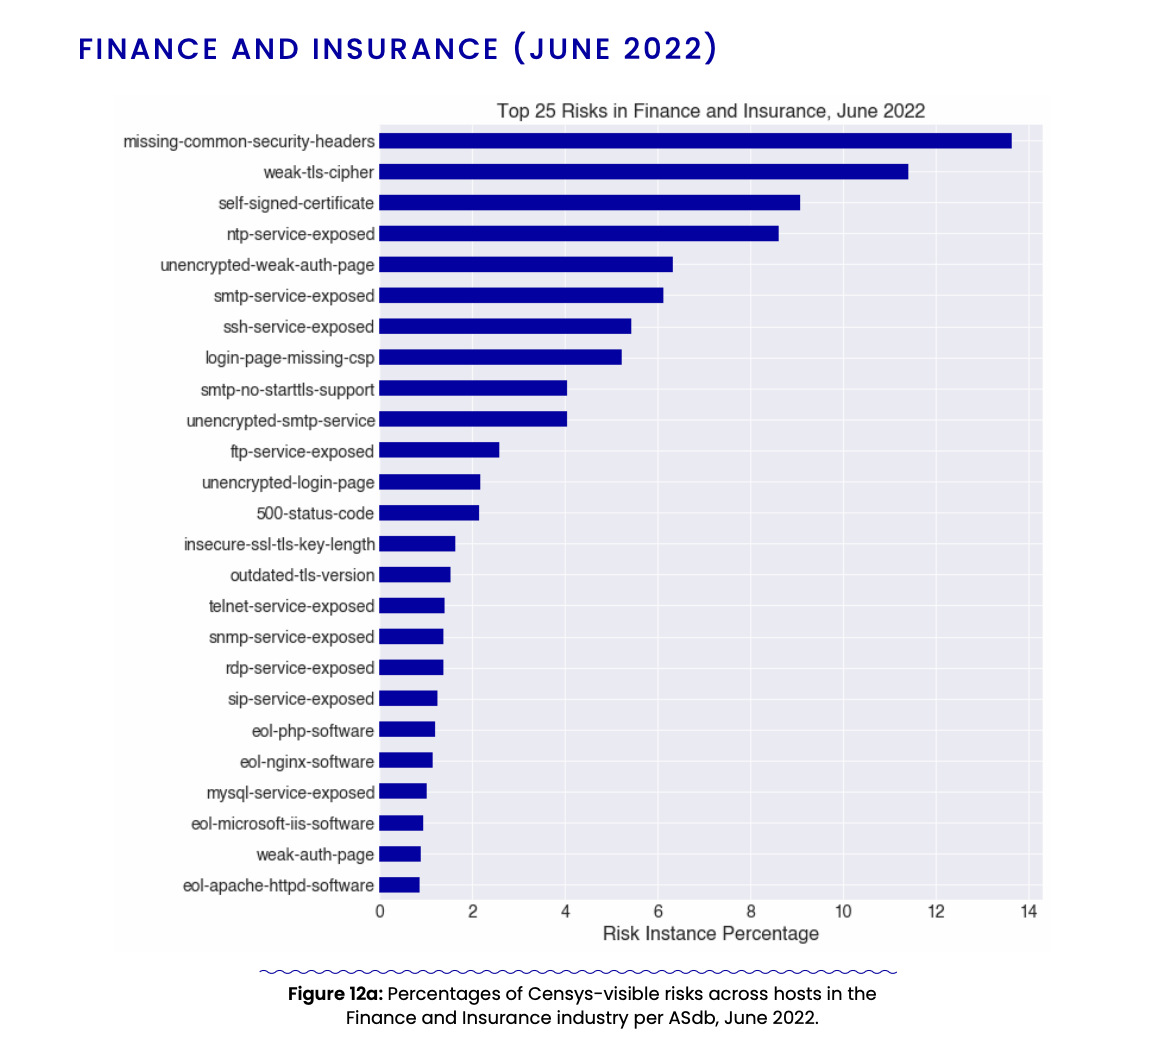 Bar chart graph of Censys-visible risks in Finance and Insurance